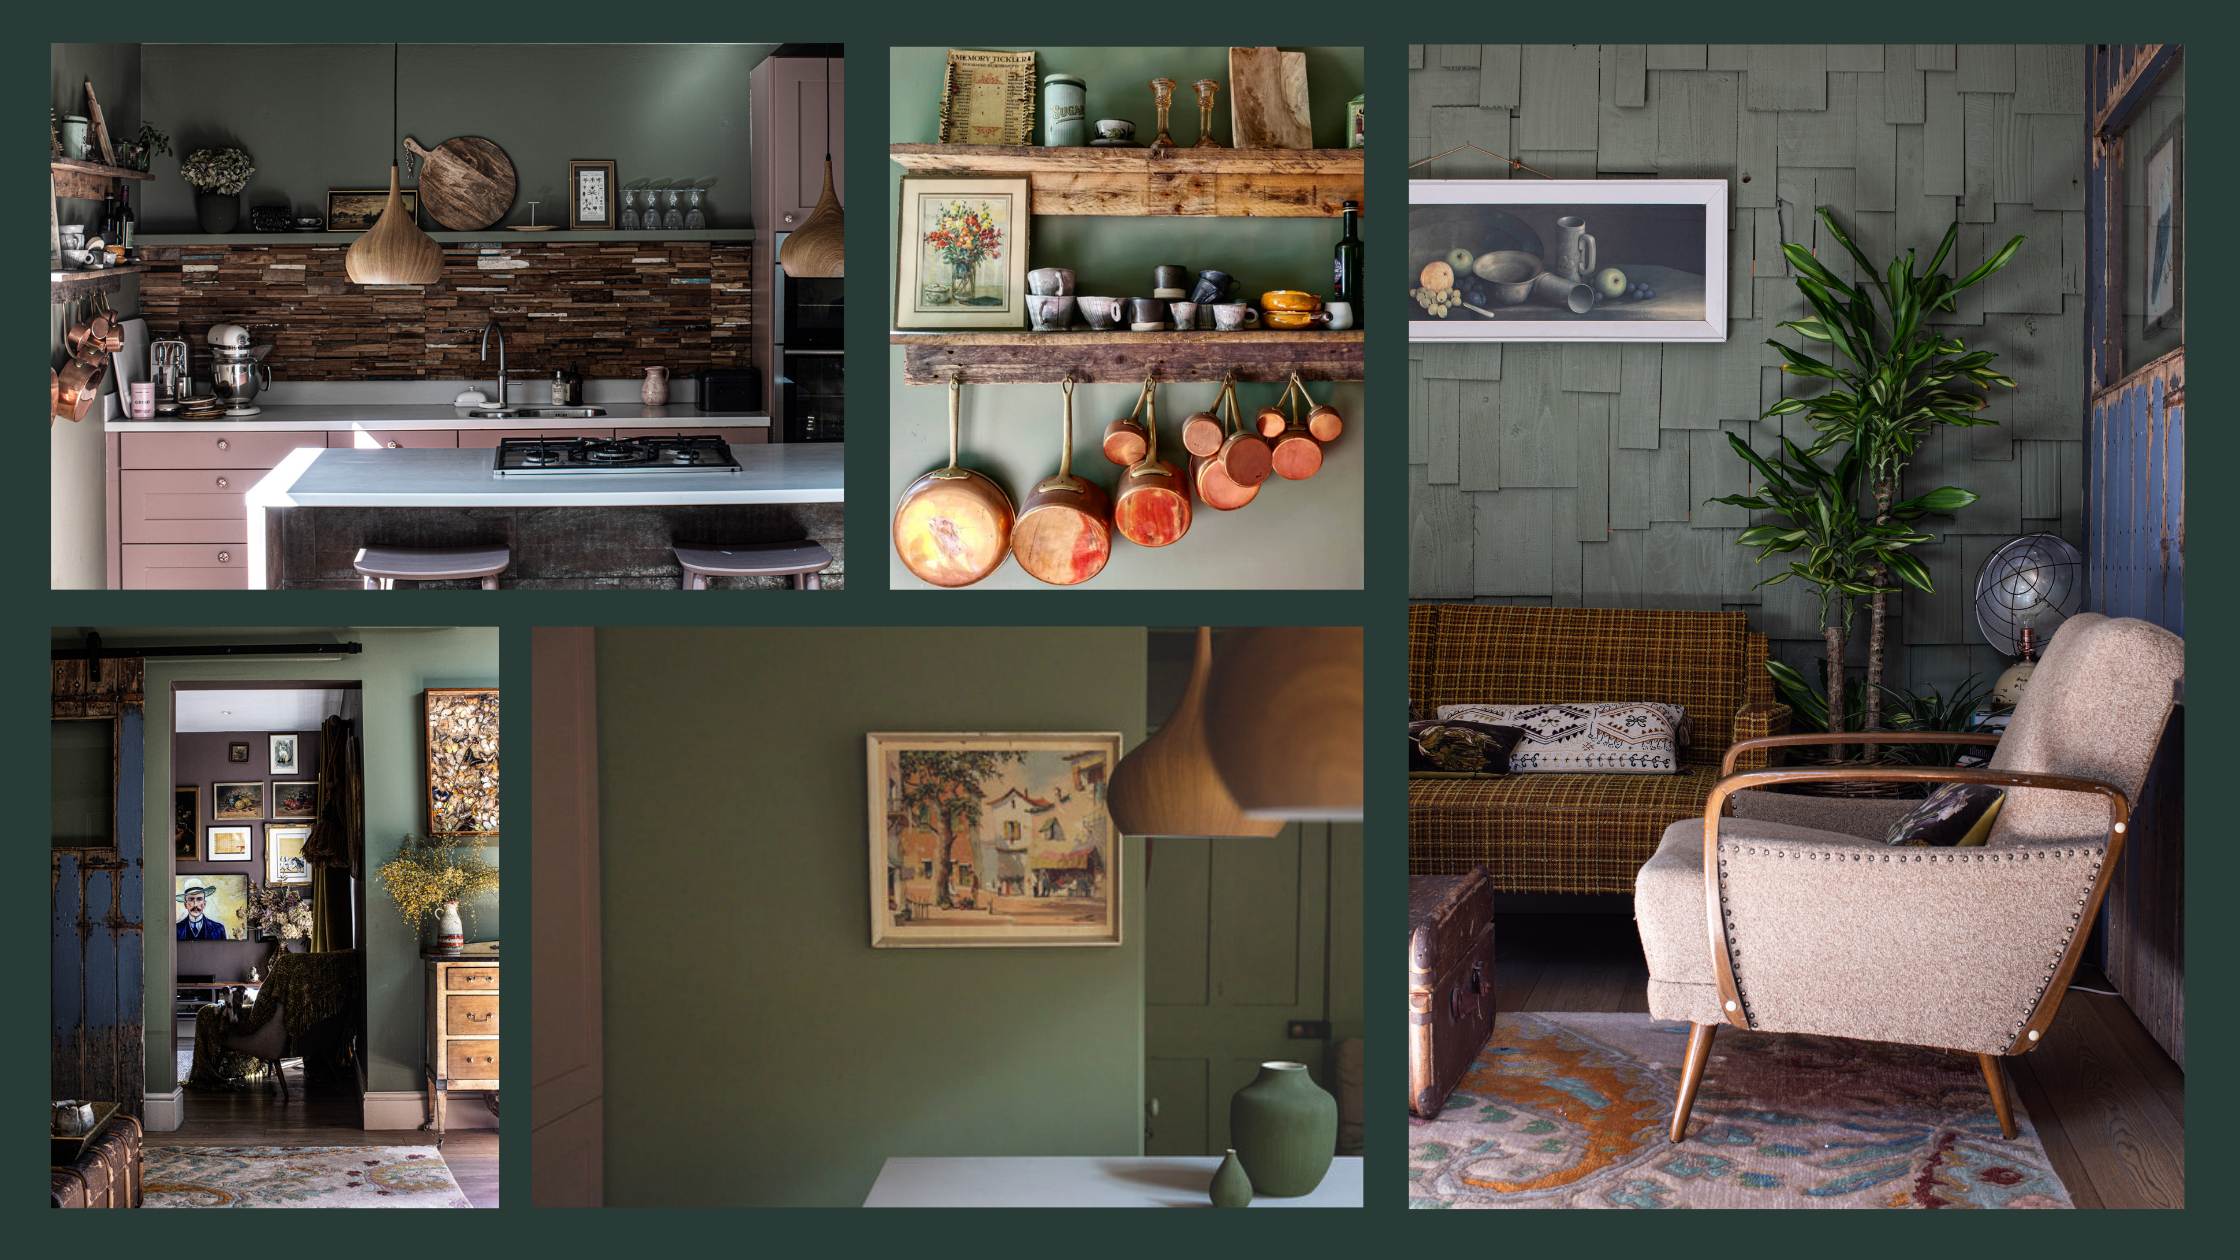 Autumnal Tones for your Kitchen